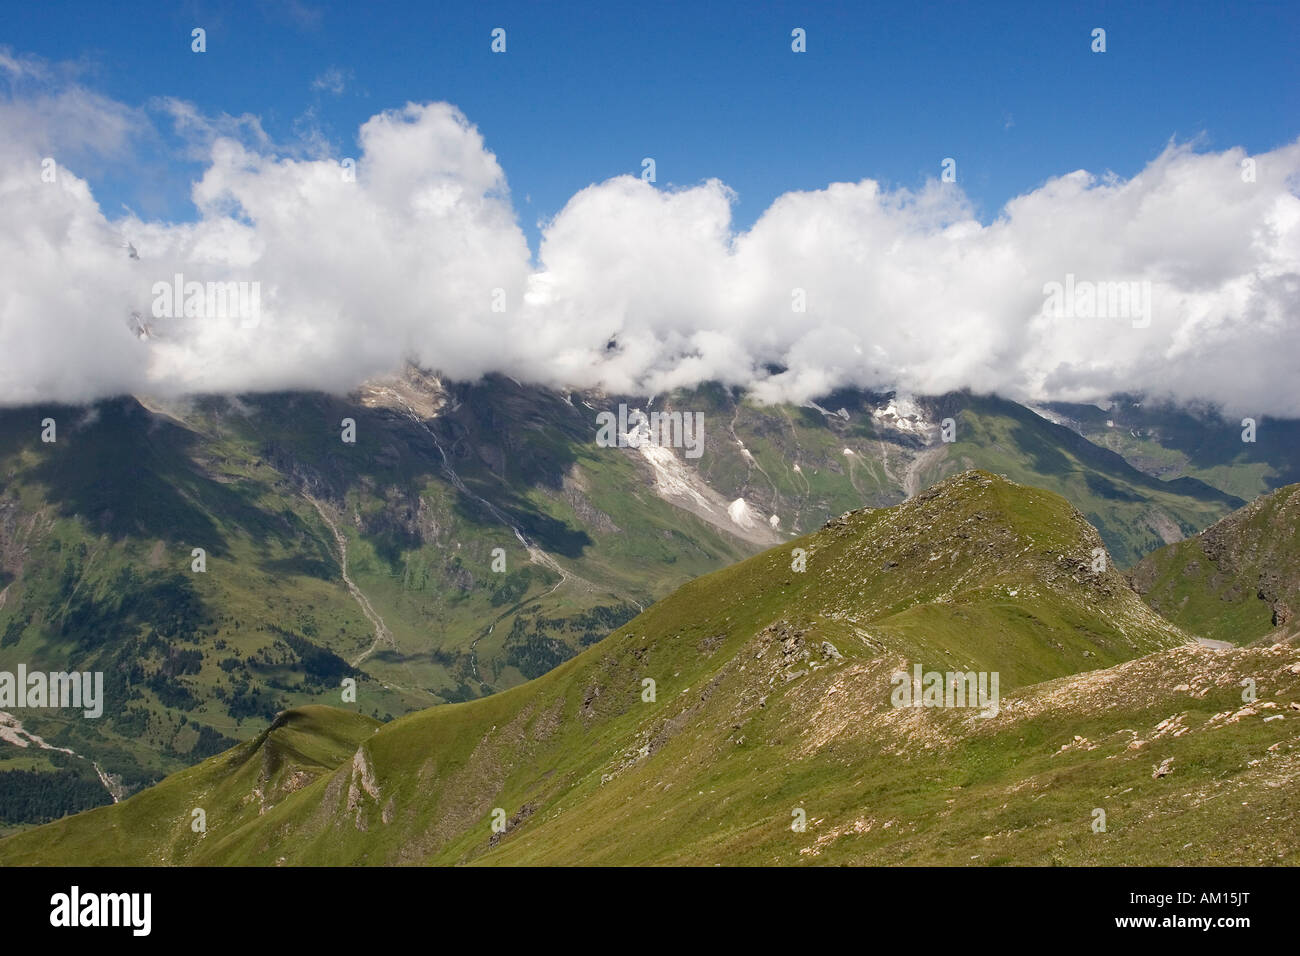 Clouds moving over a mountain chain, Grossglockner High Alpine Road, National Park Hohe Tauern, Austria Stock Photo